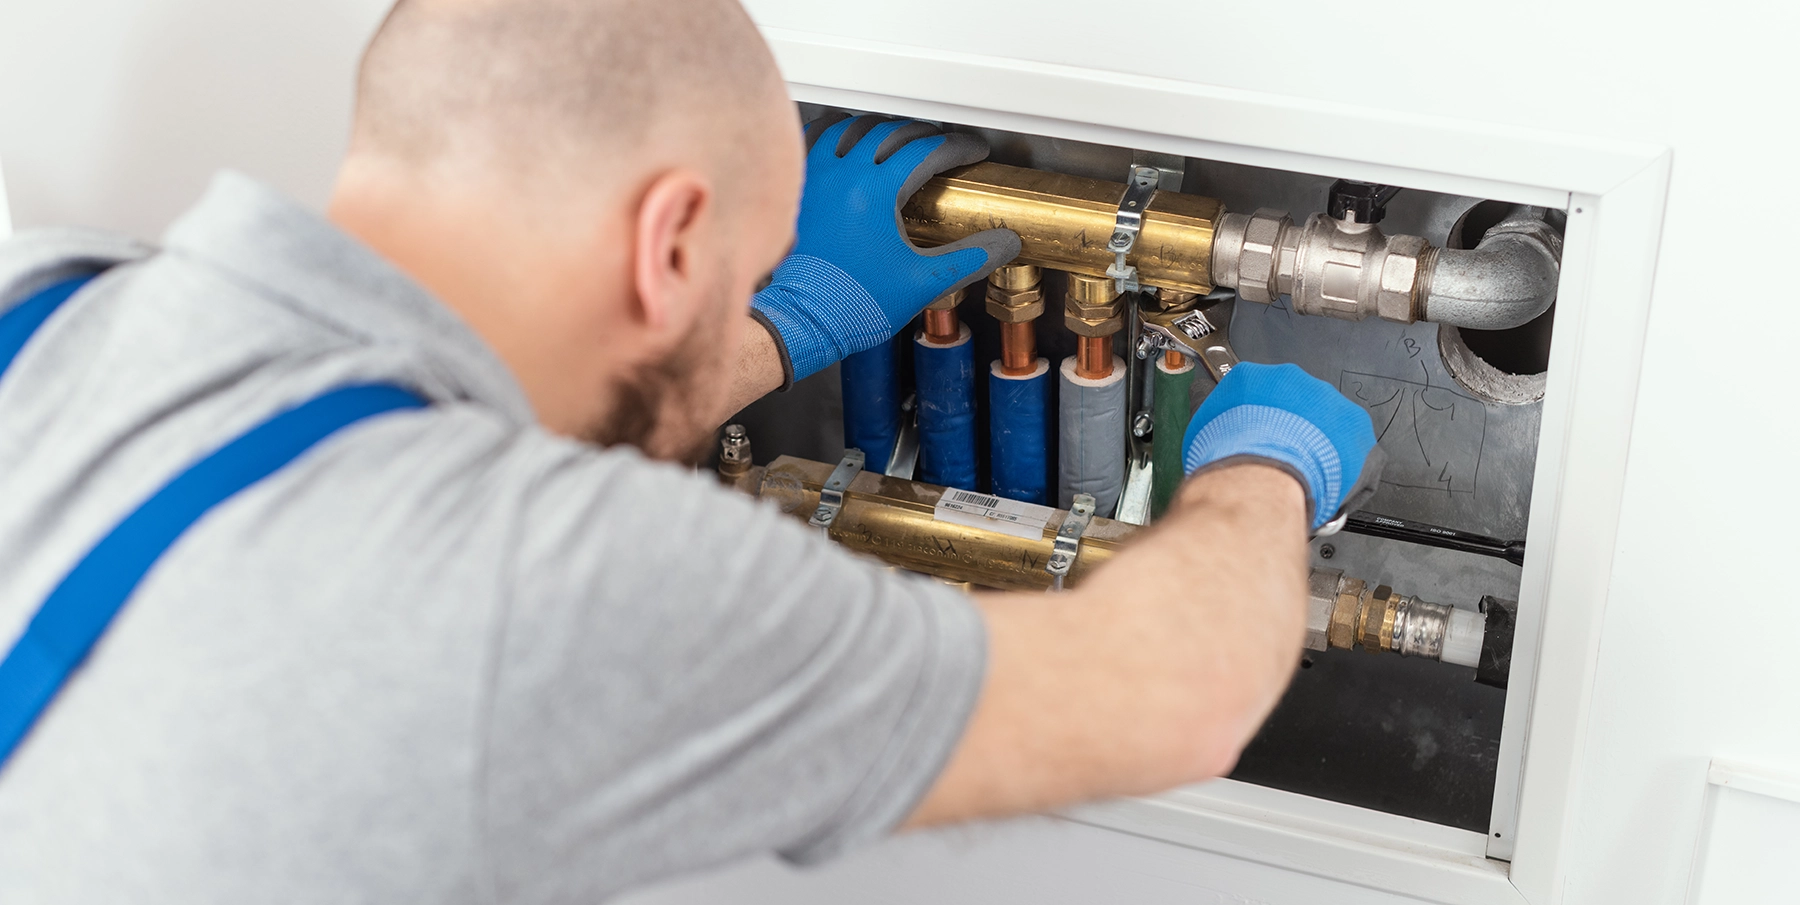 A man performs plumbing maintenance on a piping system.